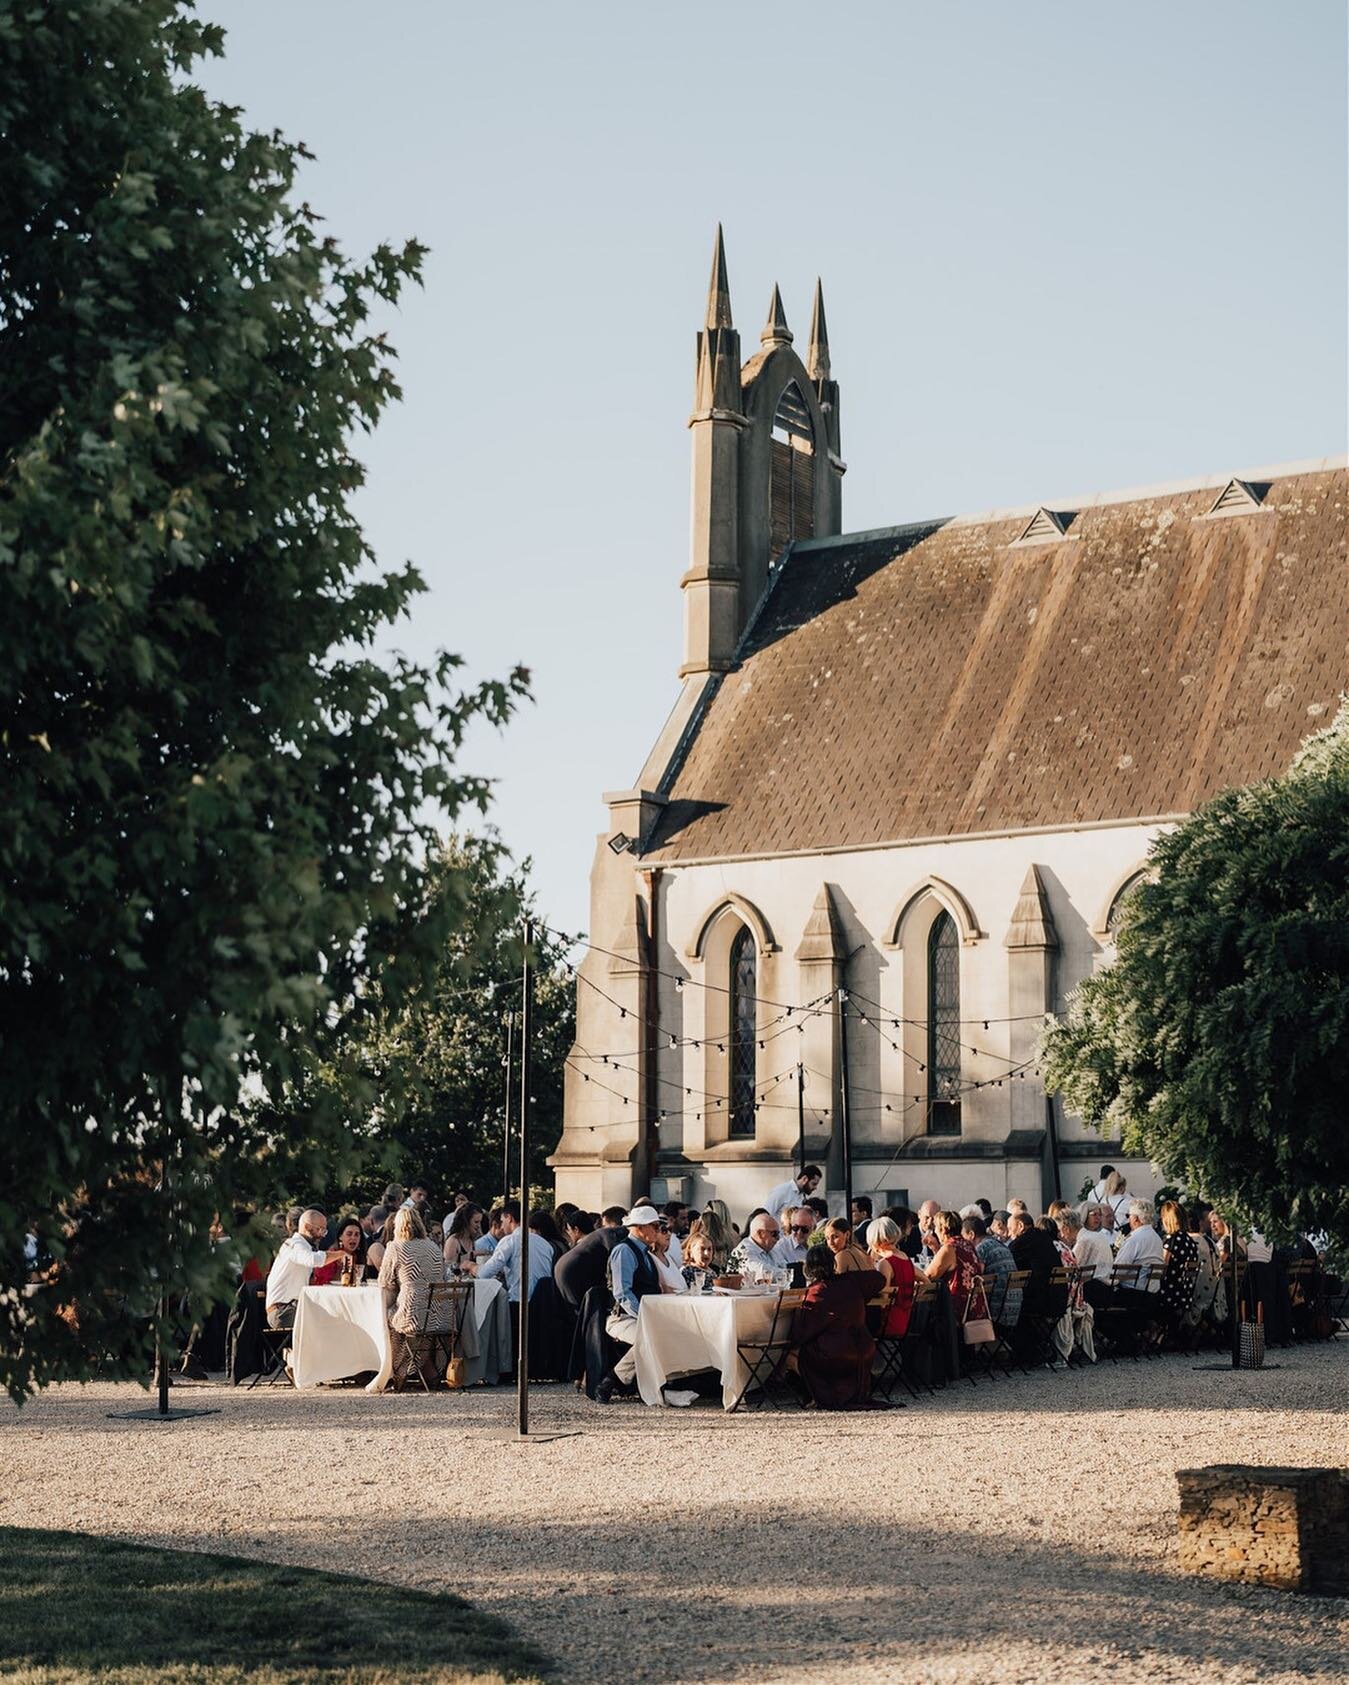 Alfresco celebrations ☀️ after the ceremony followed by aperitifs on the lawn, your guests can enjoy sunlit grazing into the afternoon &amp; fairy-lit dancing after dark, beneath the stars ✨ 
⠀⠀⠀⠀⠀⠀⠀⠀⠀
Photographed by @rick_liston